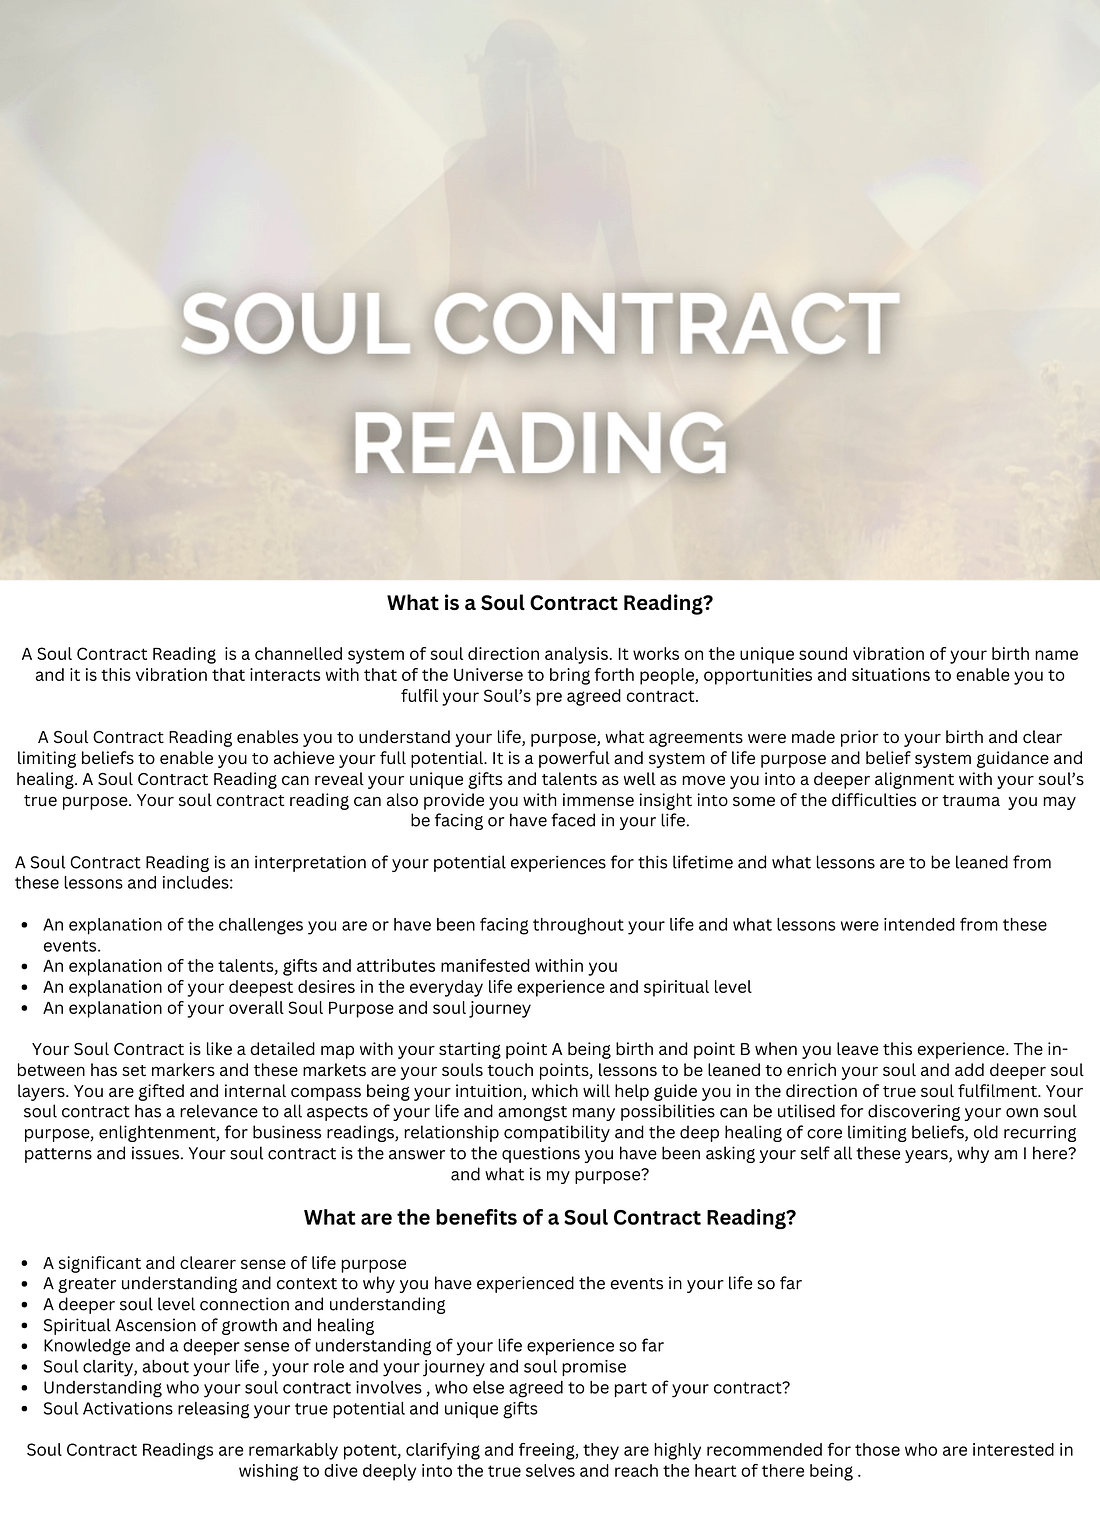 Soul Contractreading